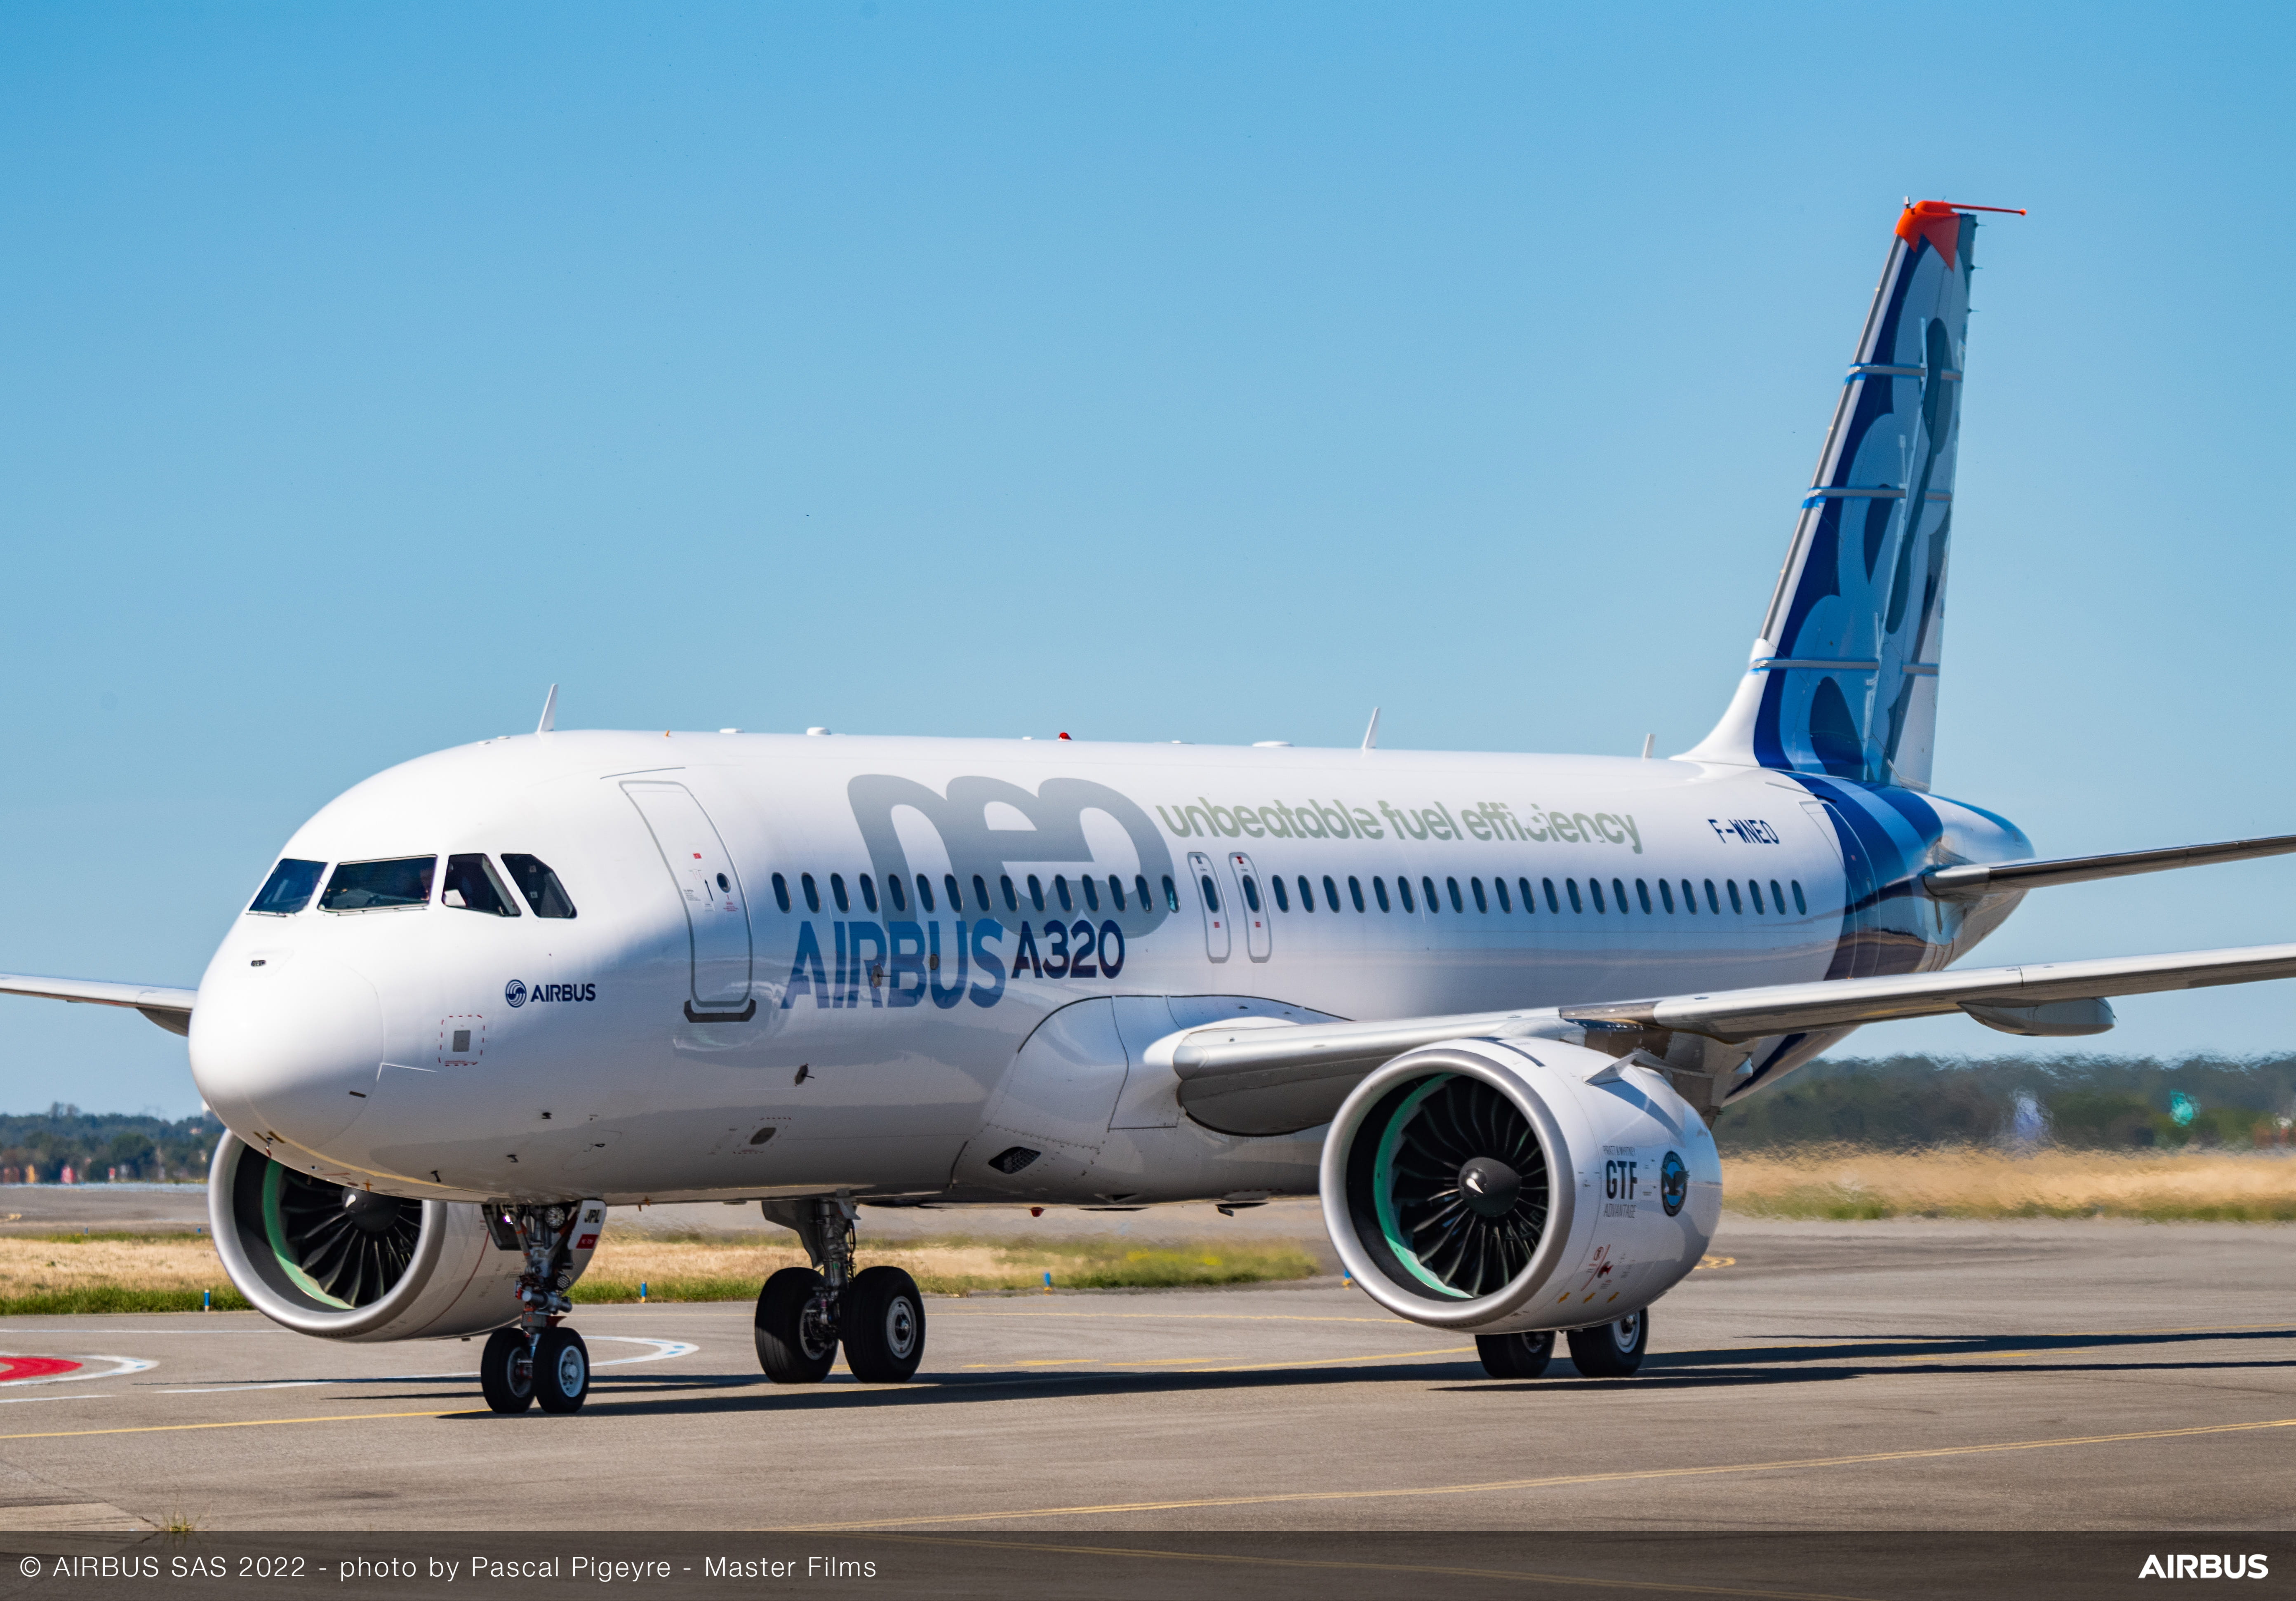 News, LATAM Selects Pratt & Whitney GTF™ Engines to Power Up to 146 Airbus  A320neo Family Aircraft